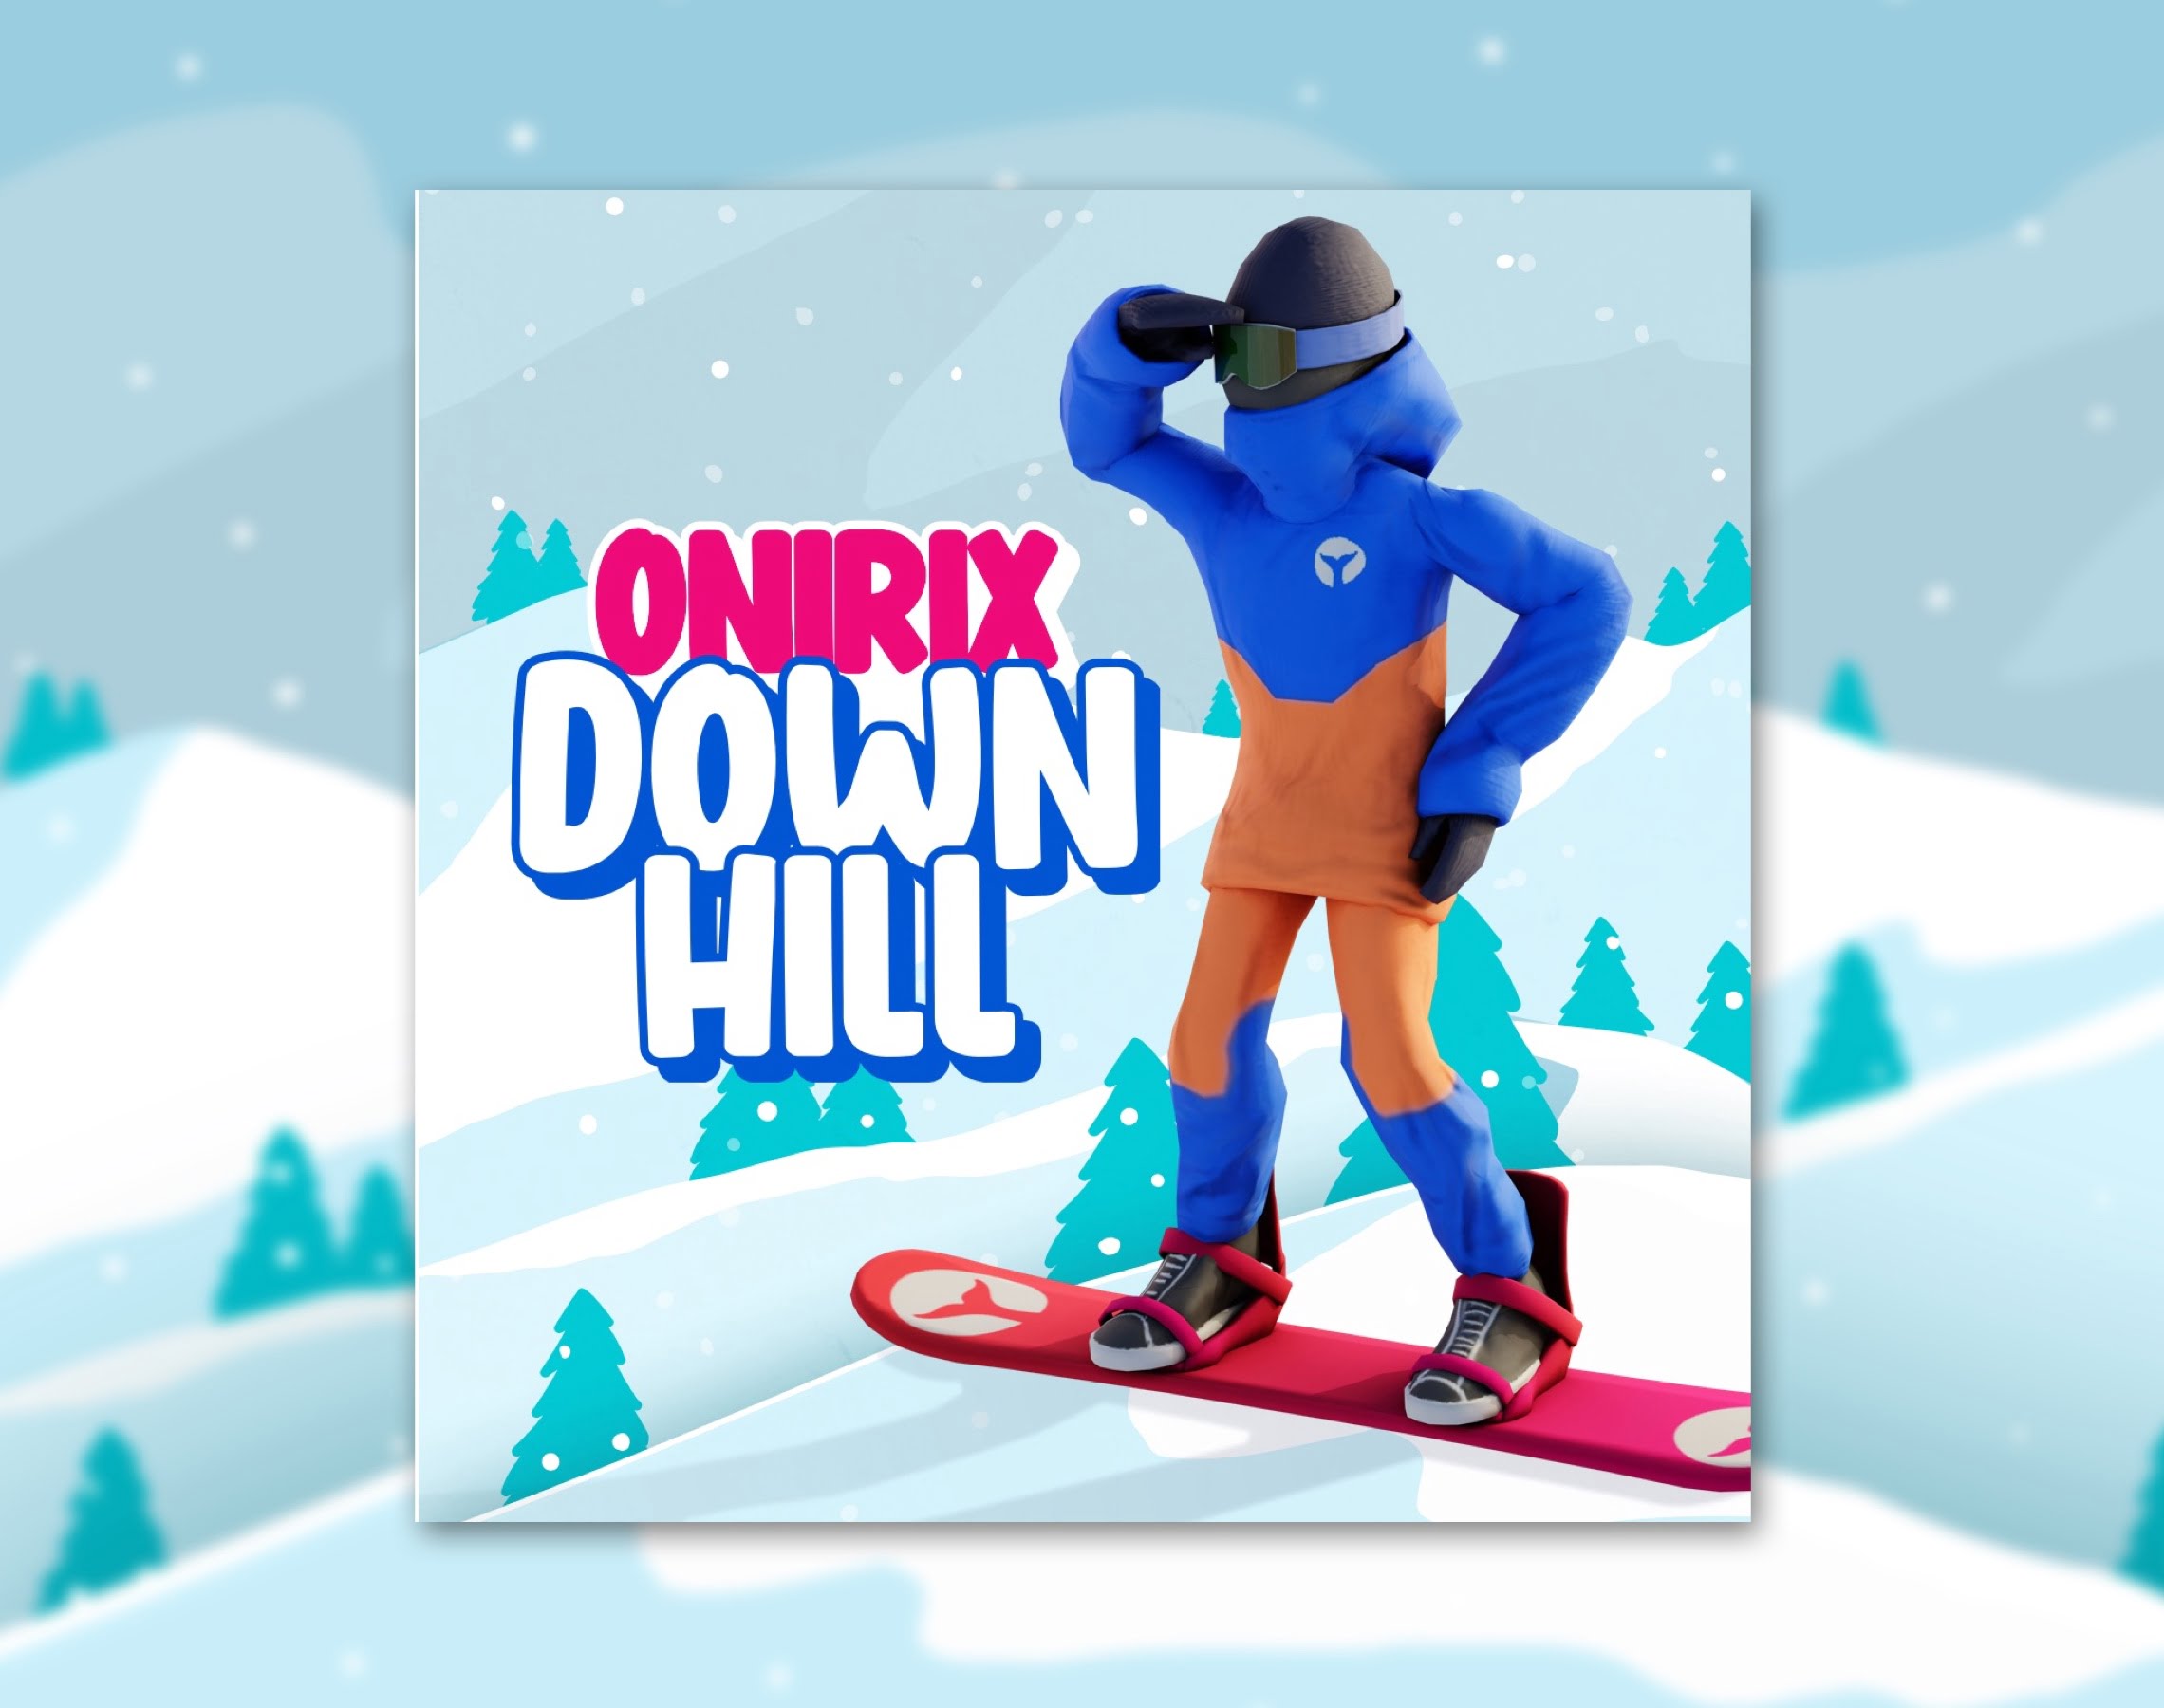 Down hill cover